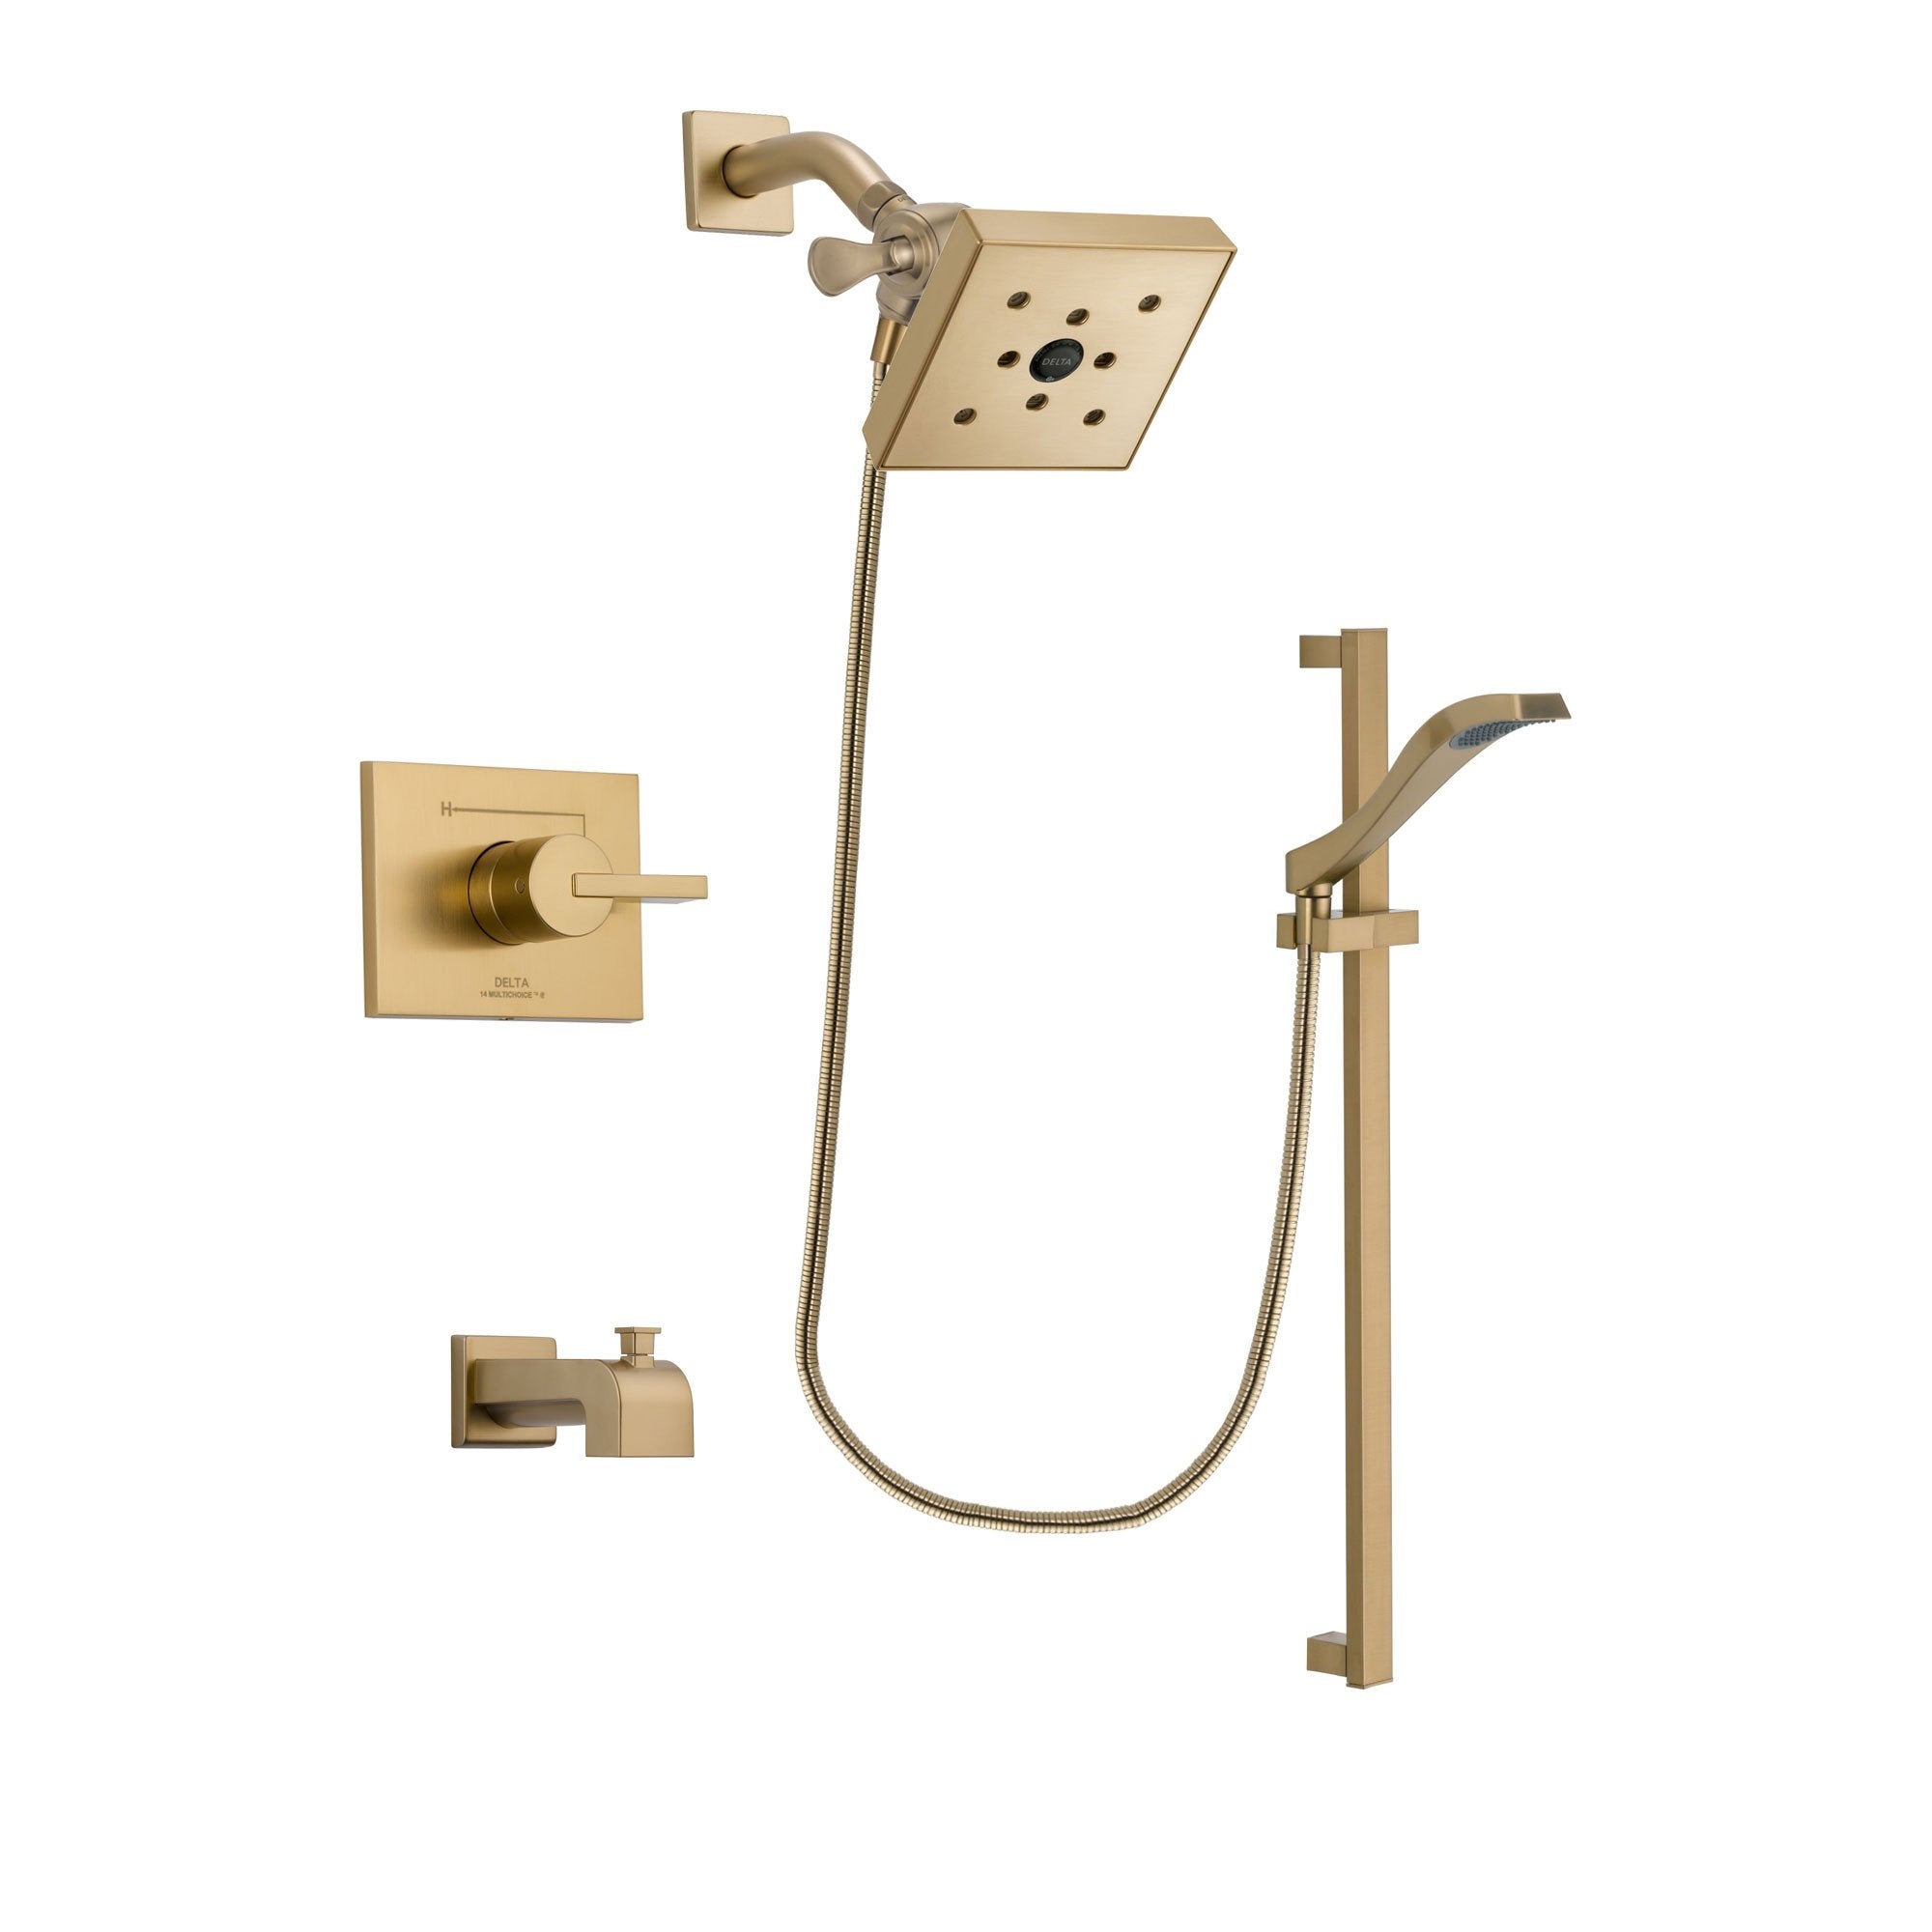 Delta Vero Champagne Bronze Finish Tub and Shower Faucet System Package with Square Shower Head and Modern Handheld Shower Spray with Slide Bar Includes Rough-in Valve and Tub Spout DSP3939V